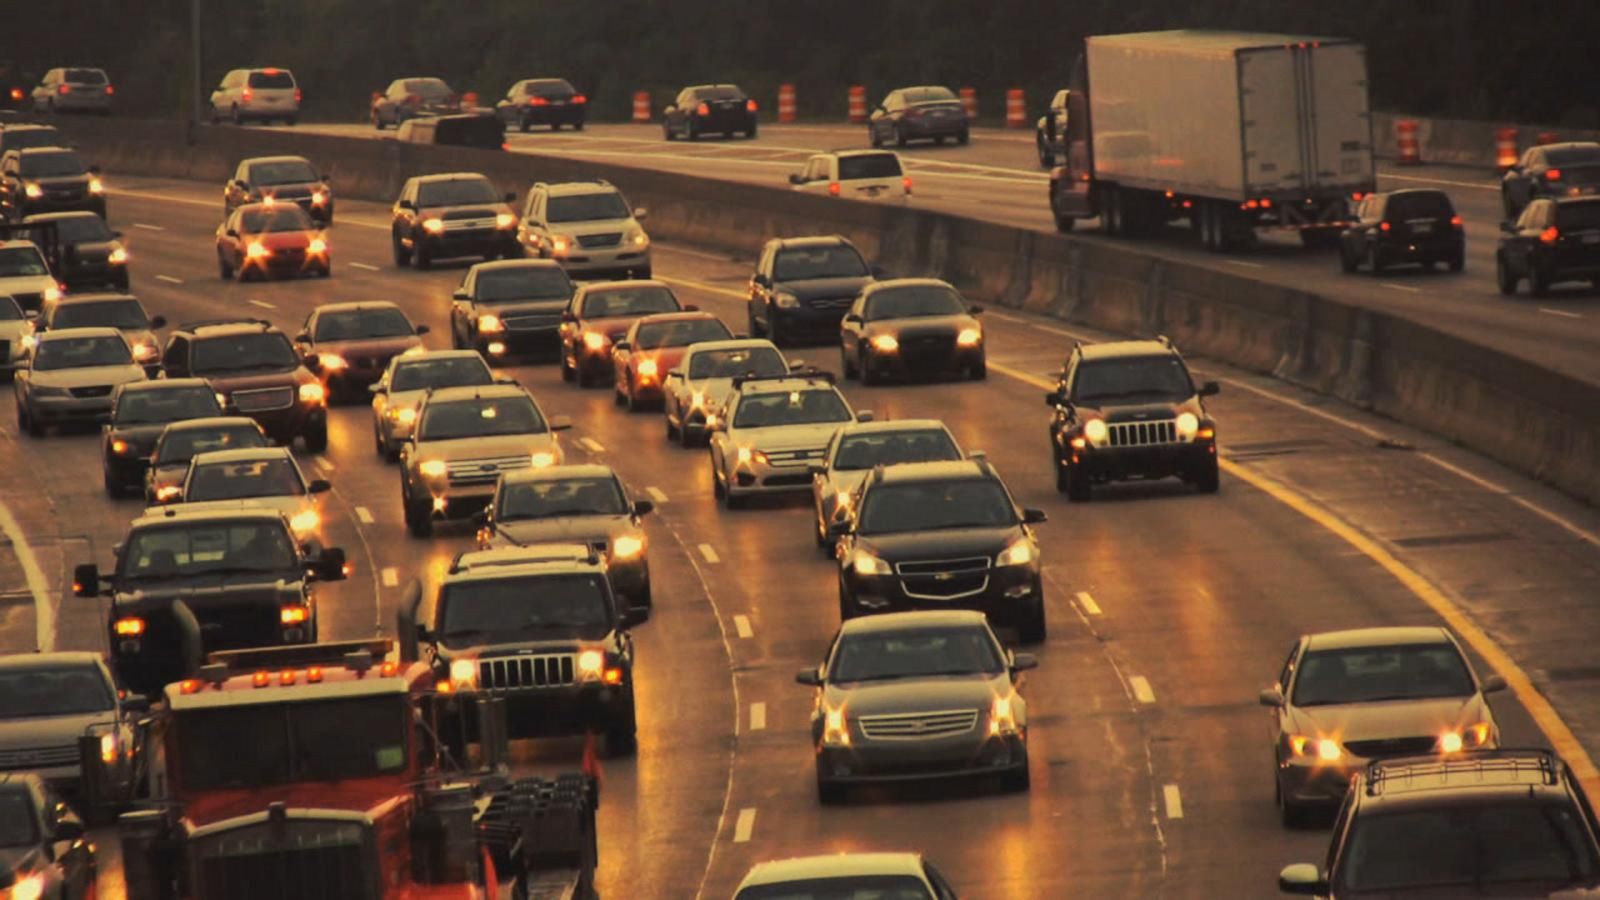 VIDEO: Record number of travelers hit the road for 4th of July